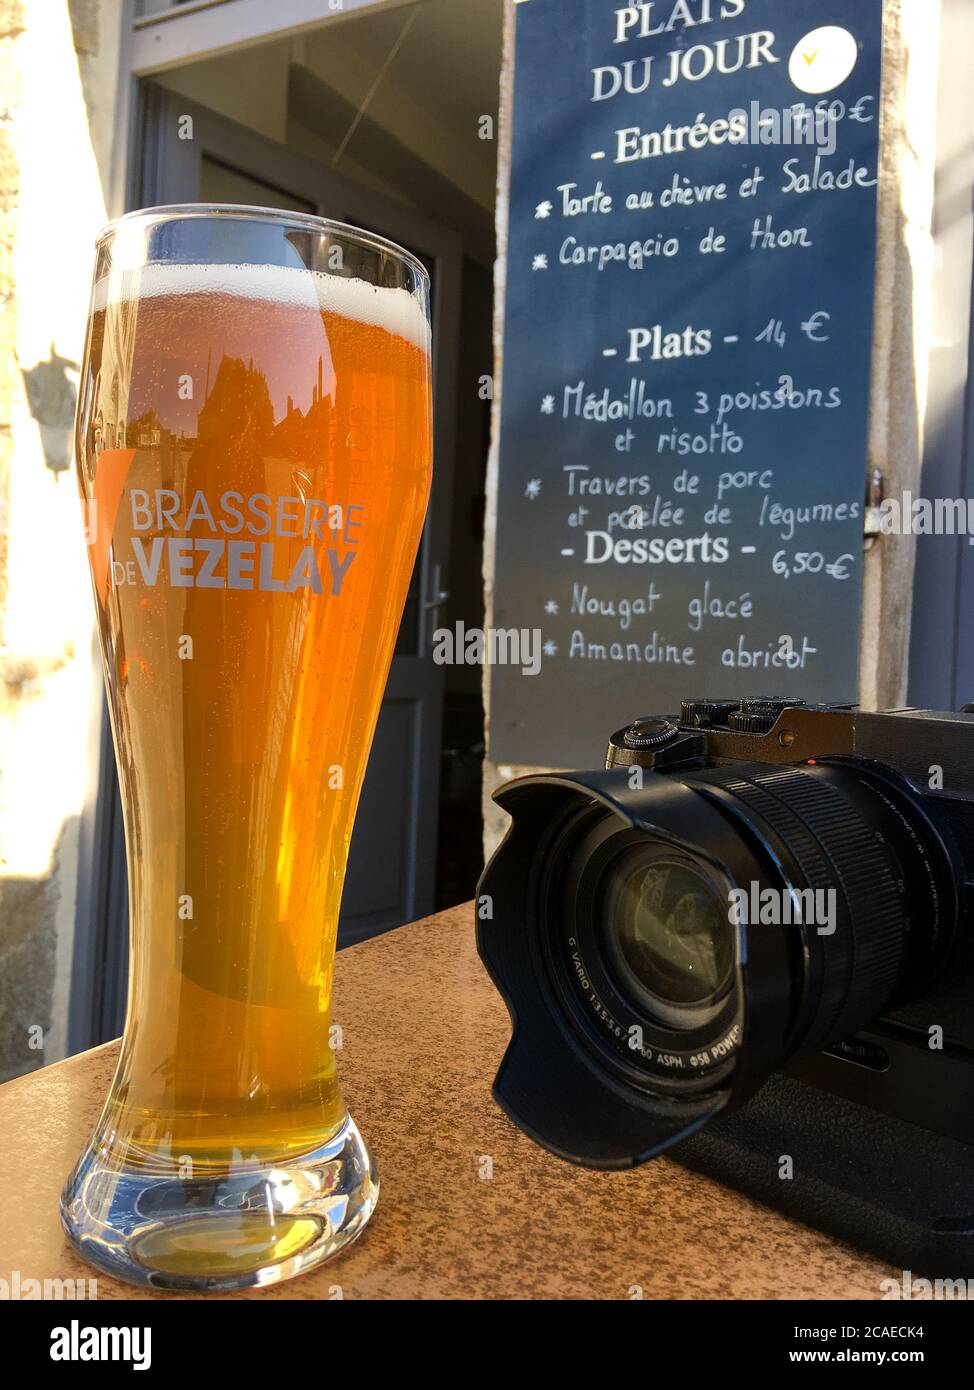 Digital camera and glass of beer, illustration for a photographer's way of life, Vezelay, Yonne, Bourgogne Franche-Comté, France Stock Photo